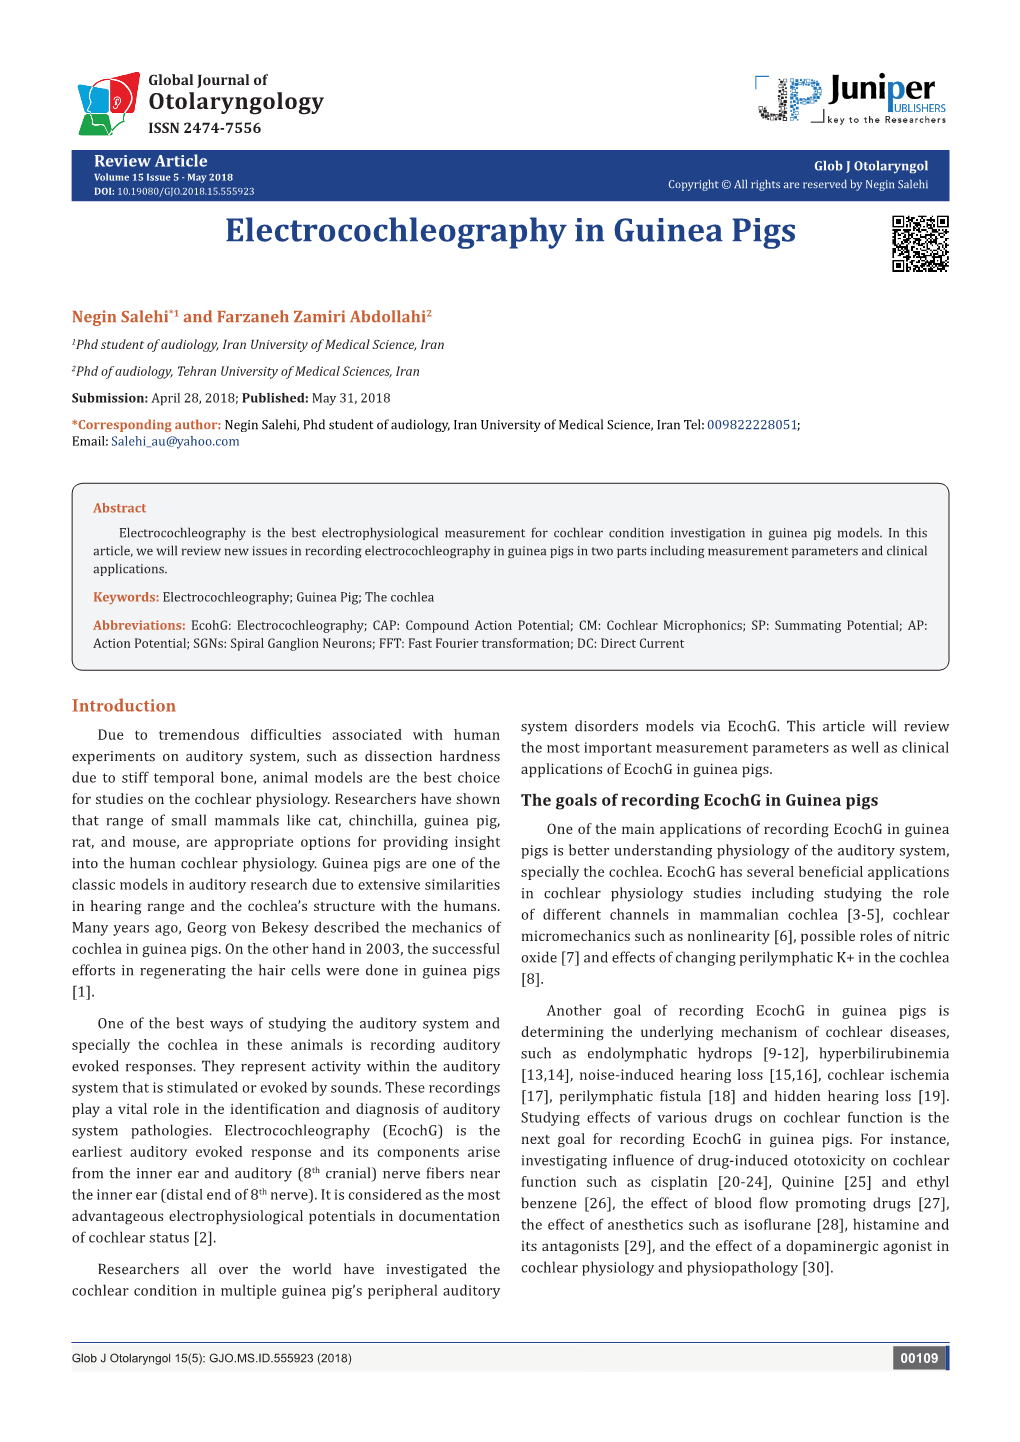 Electrocochleography in Guinea Pigs